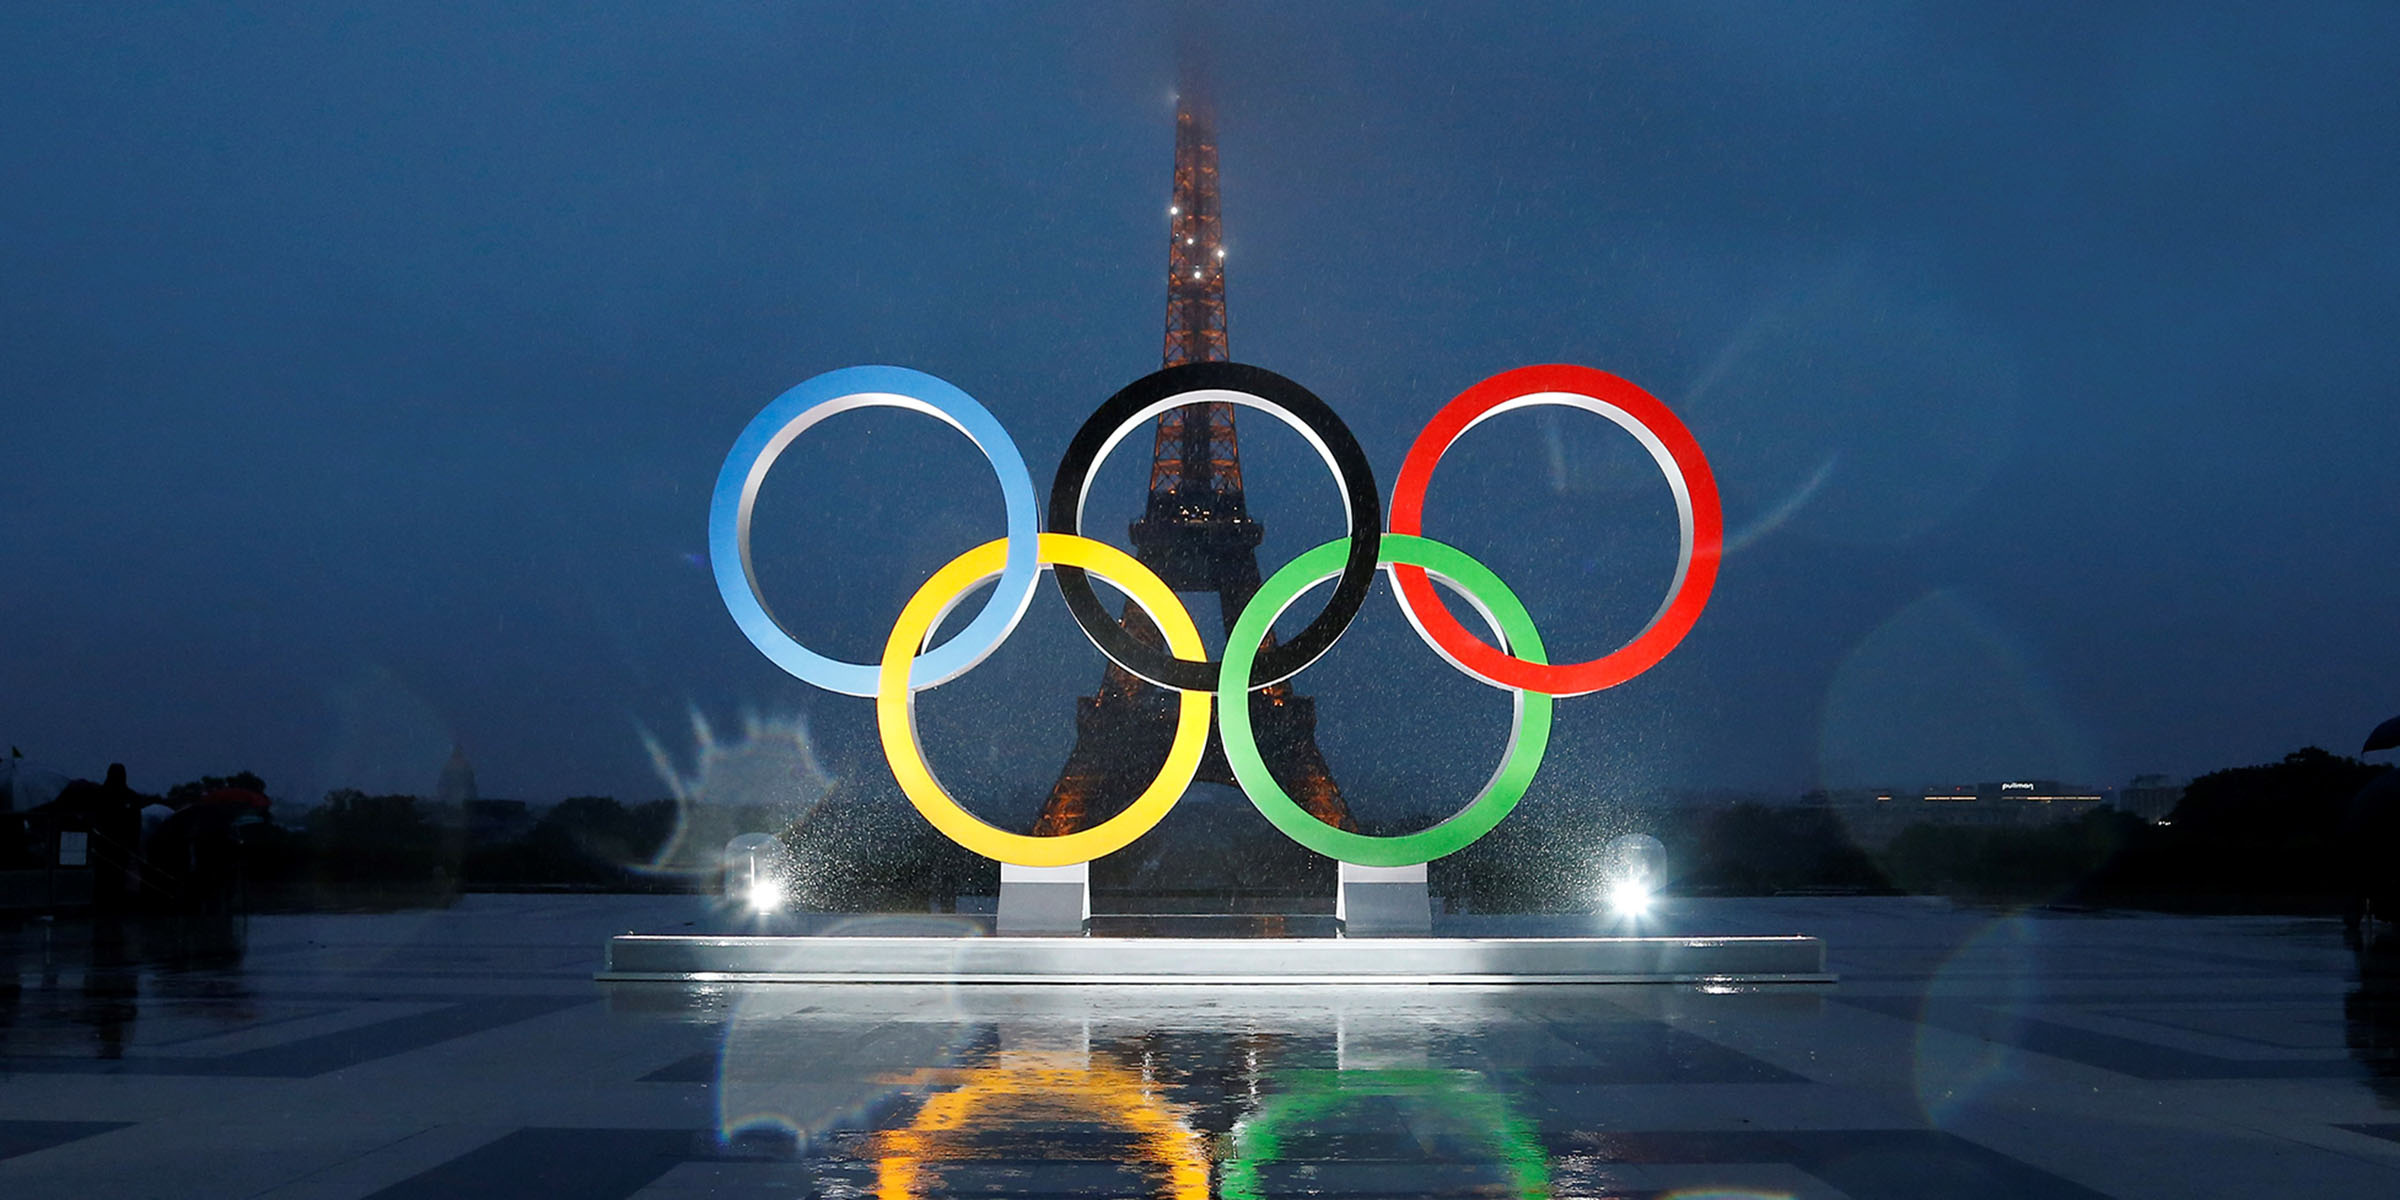 Olympics: France, International Olympic Committee, Pierre de Coubertin, Founder of the Olympic Movement. 2400x1200 Dual Screen Wallpaper.